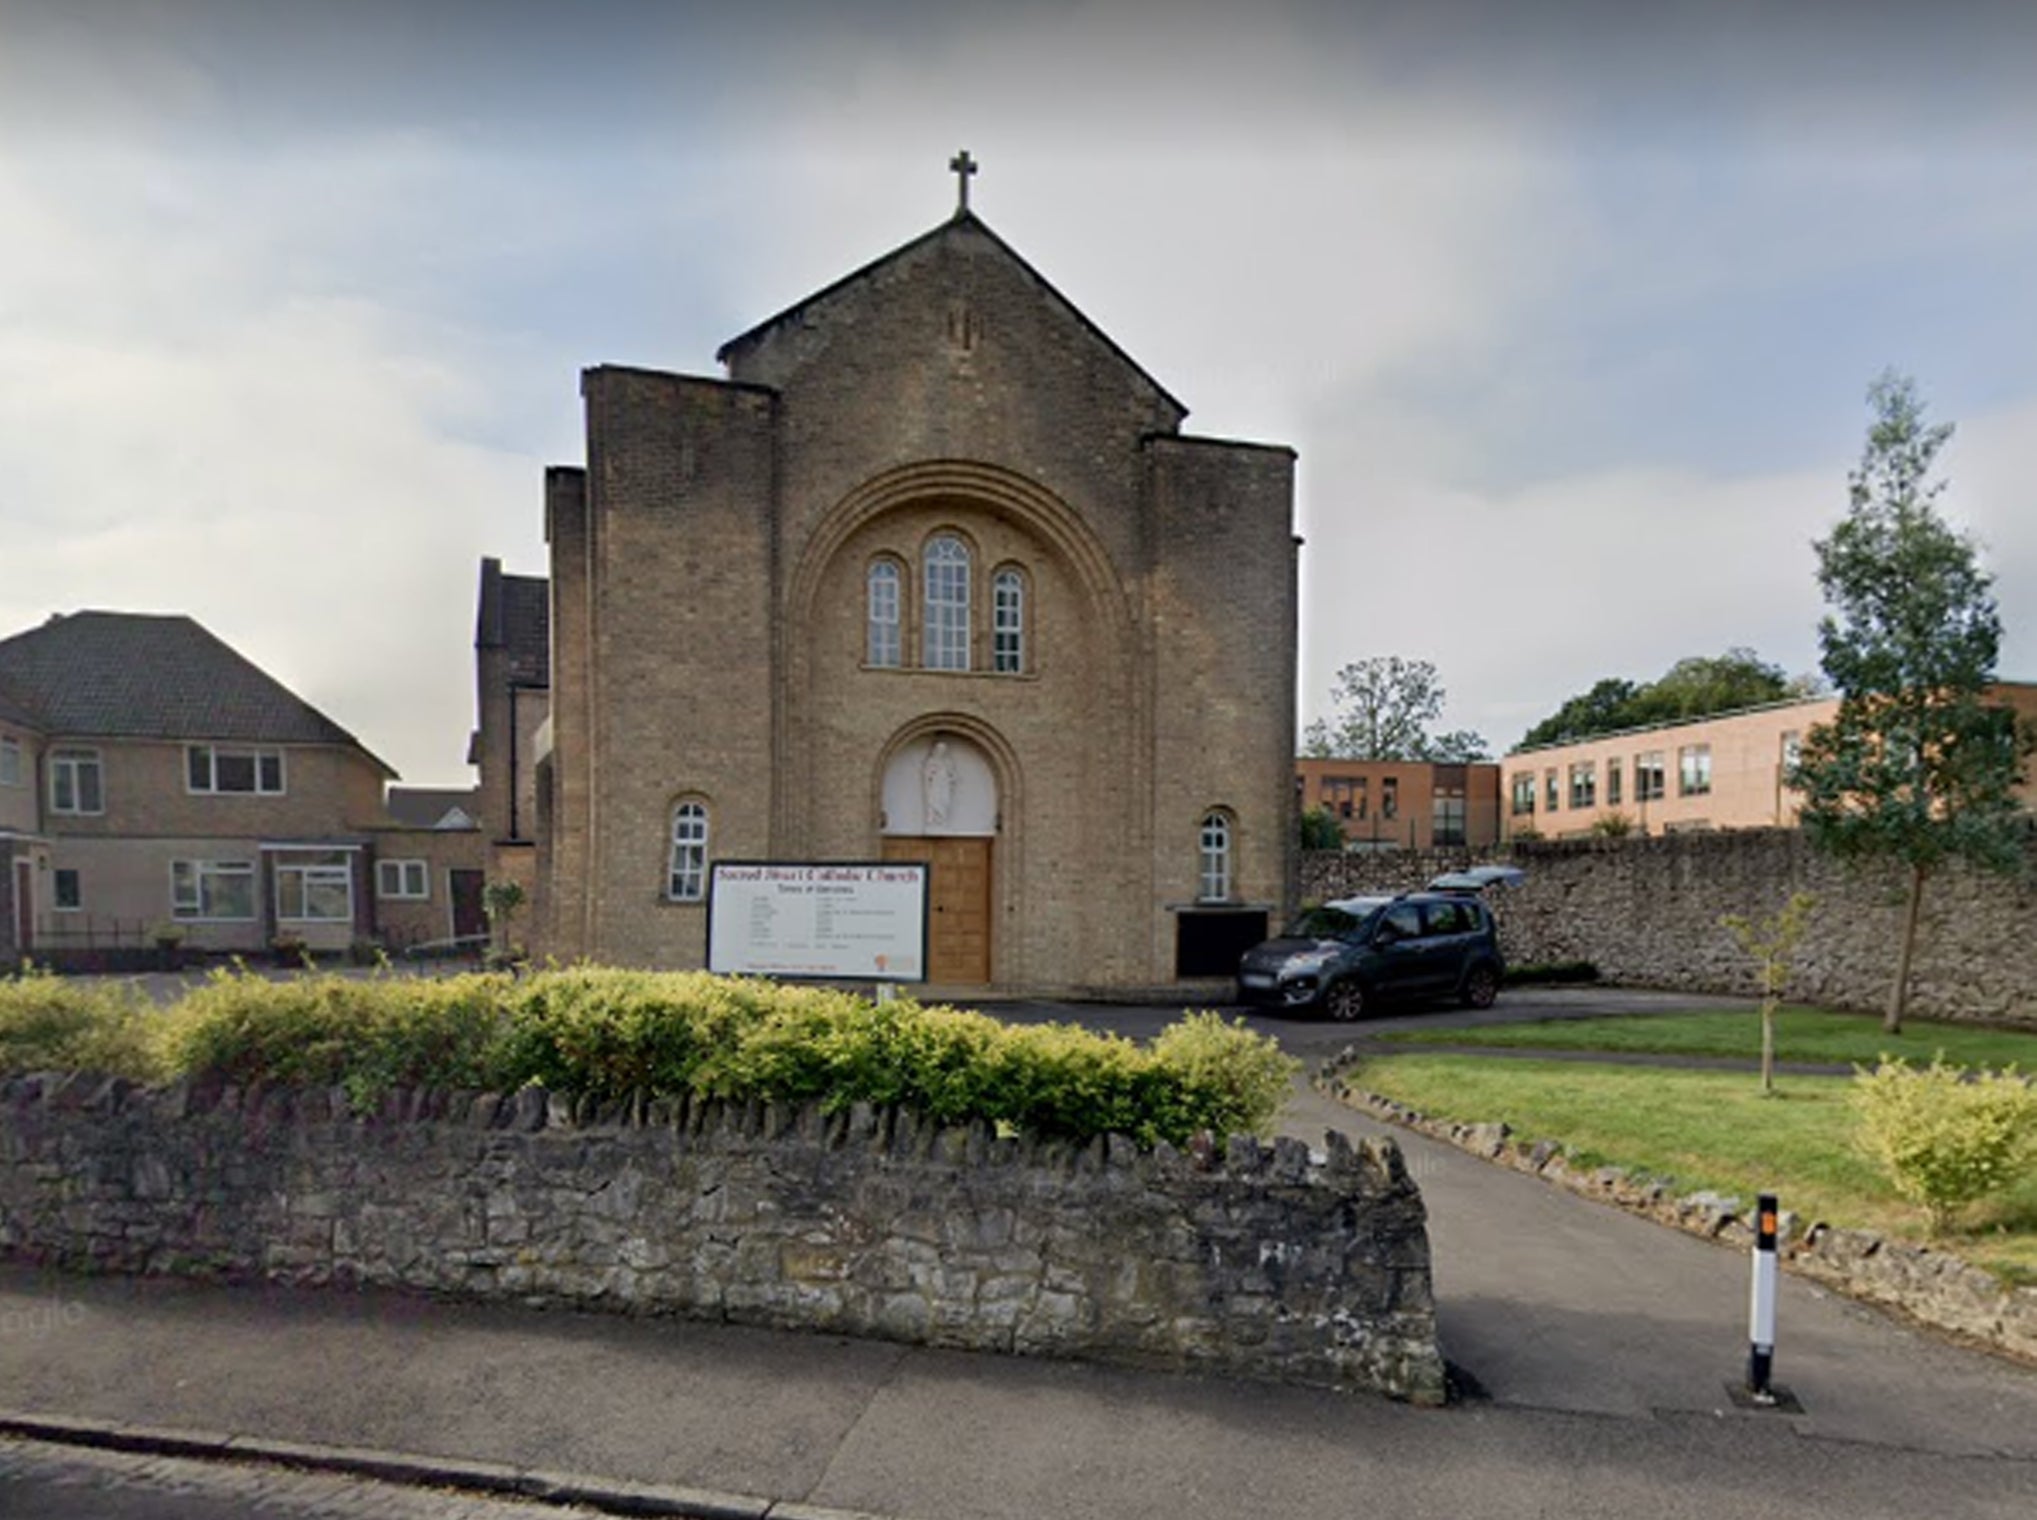 A priest was assaulted on the church grounds of Sacred Heart Church in Westbury-on-Trym, Bristol